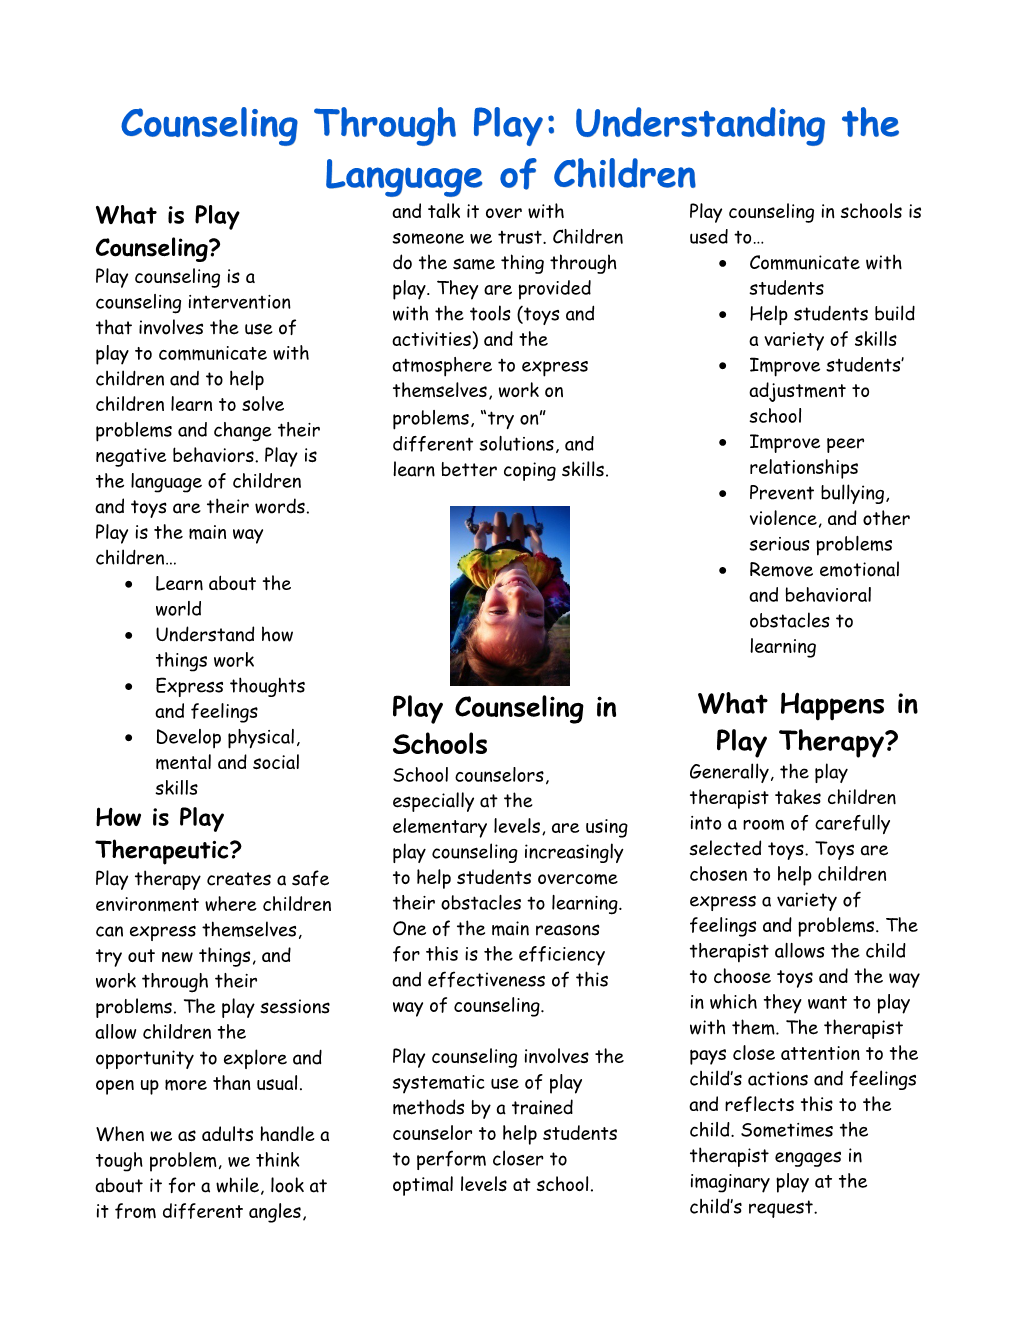 Counseling Through Play: Understanding the Language of Children